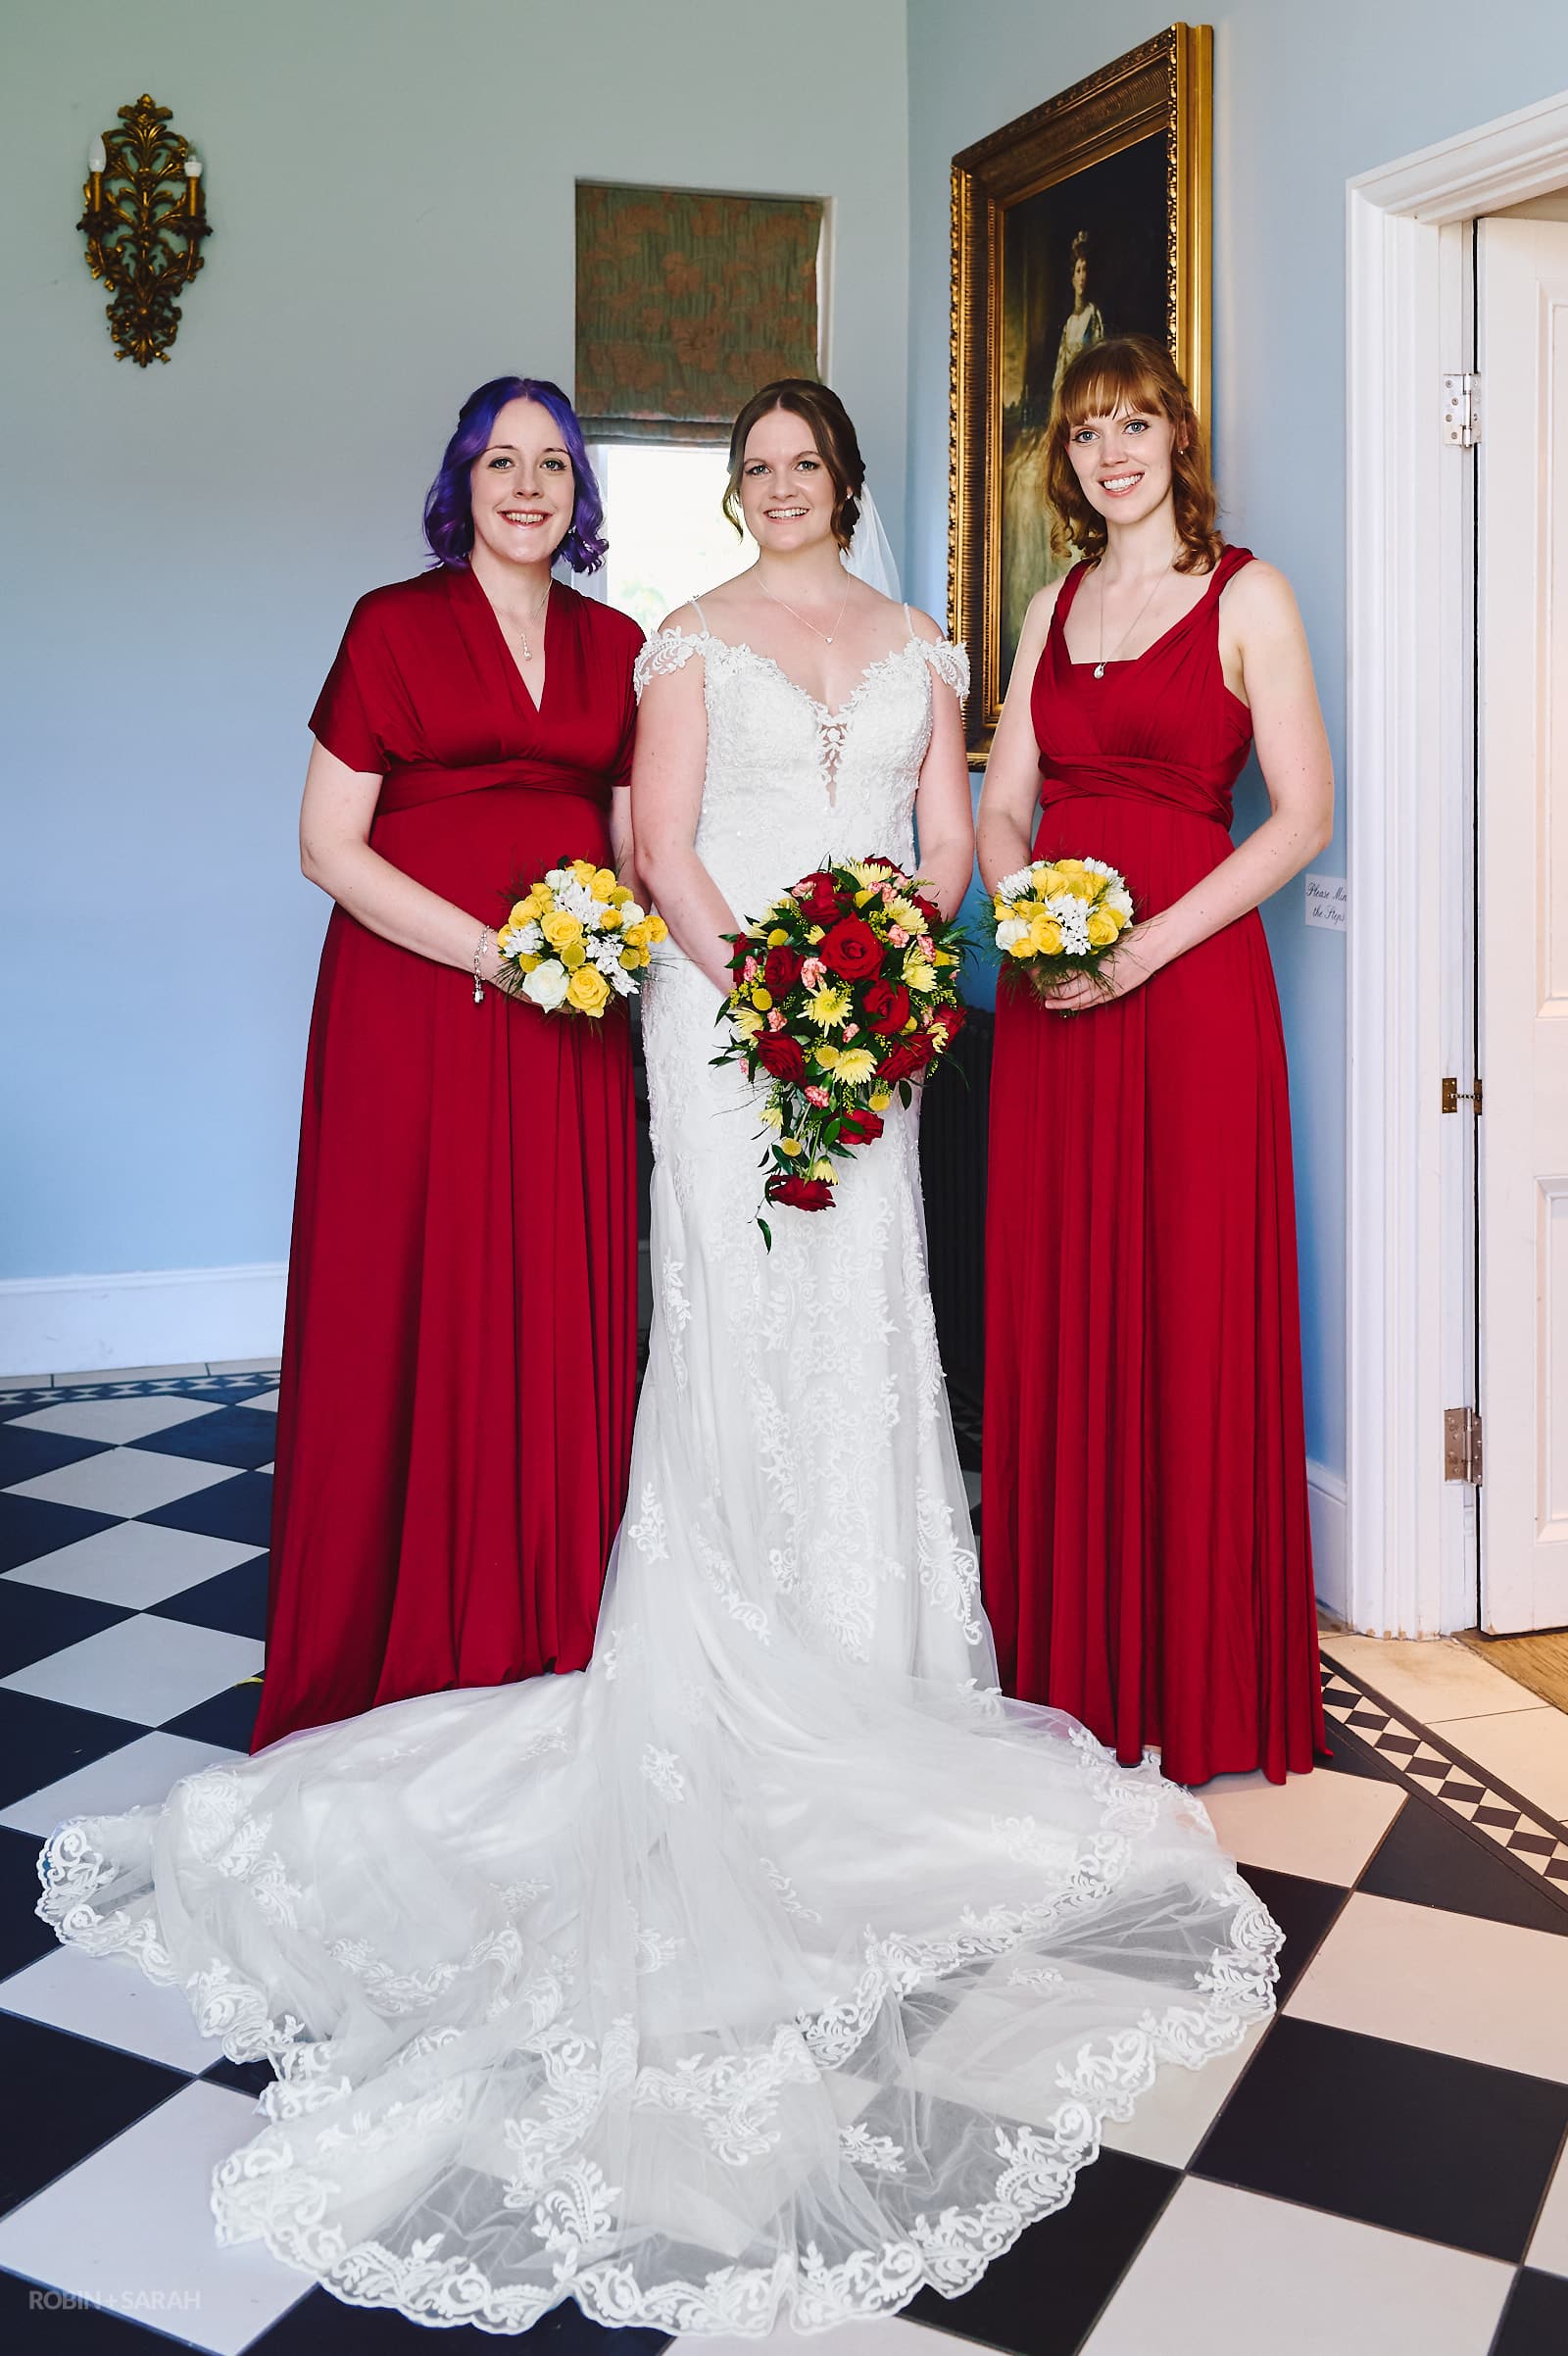 Wedding group photo of bride and two bridesmaids at Stanbrook Abbey